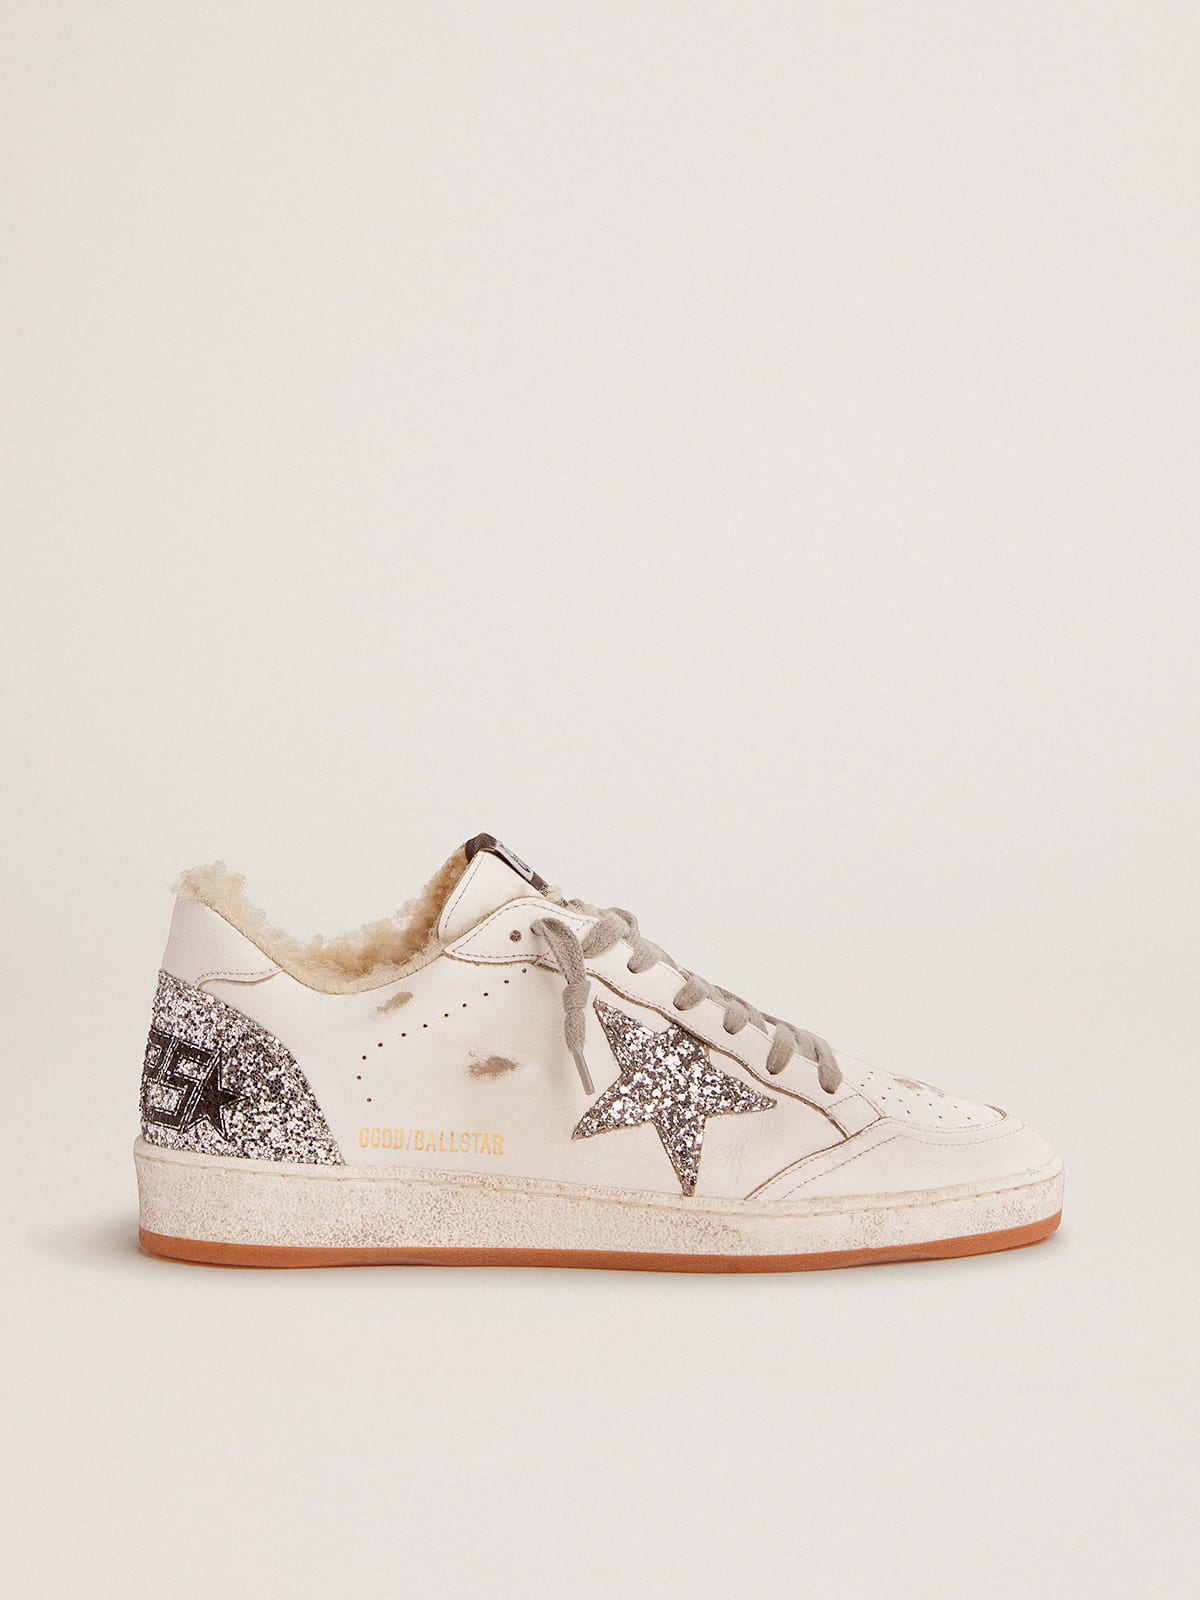 Ball Star sneakers in leather with glitter details and shearling lining |  Golden Goose